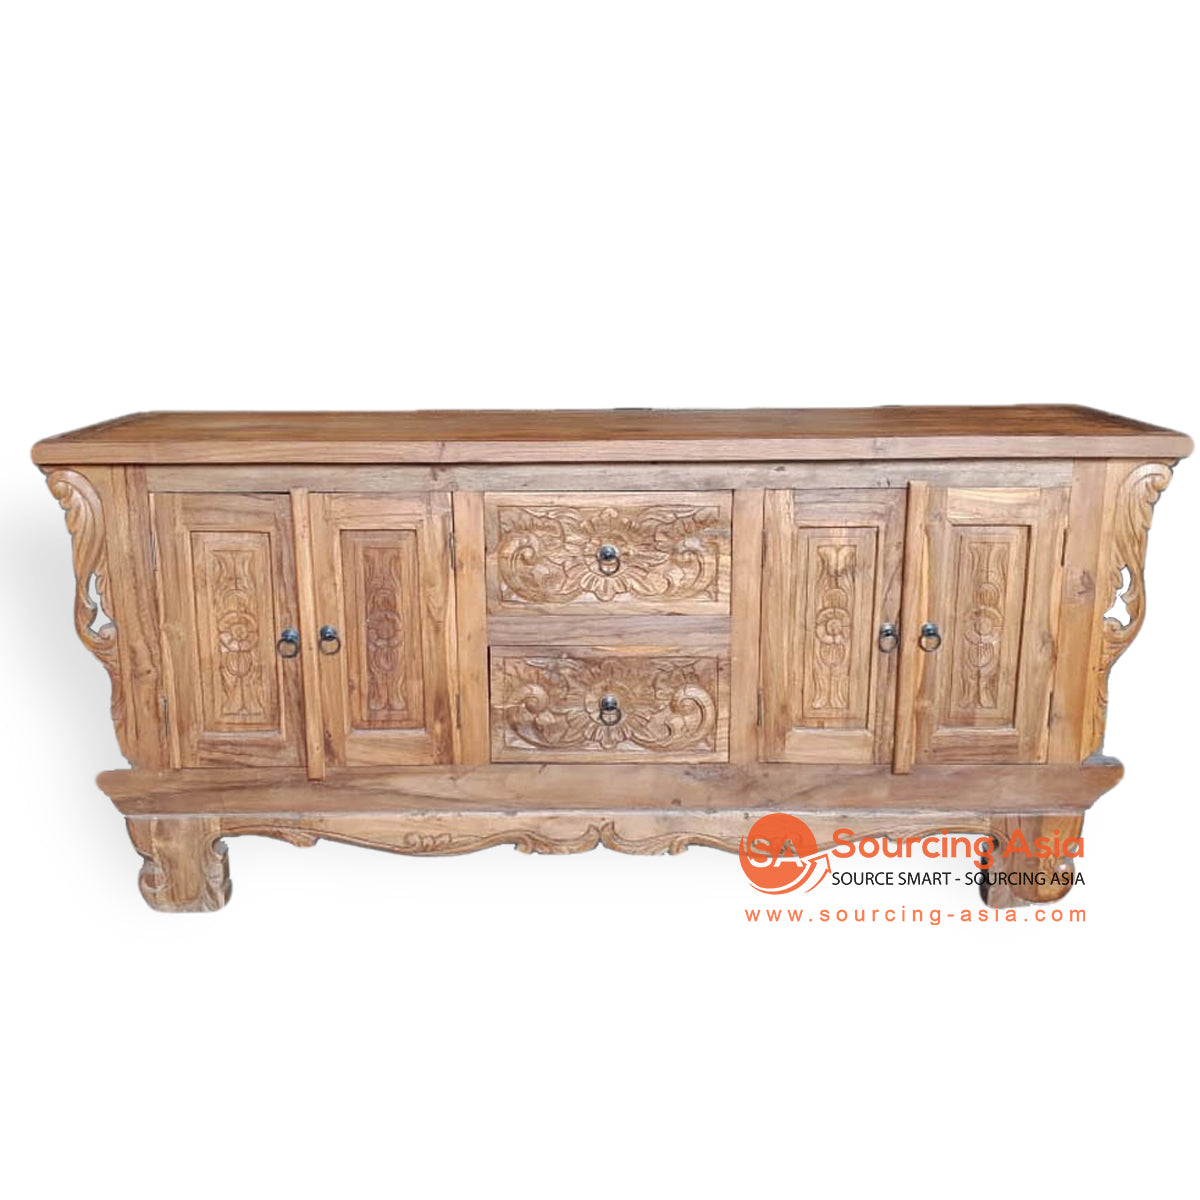 LAC058 NATURAL RECYCLED TEAK WOOD FOUR DOORS AND TWO DRAWERS CARVED BUFFET